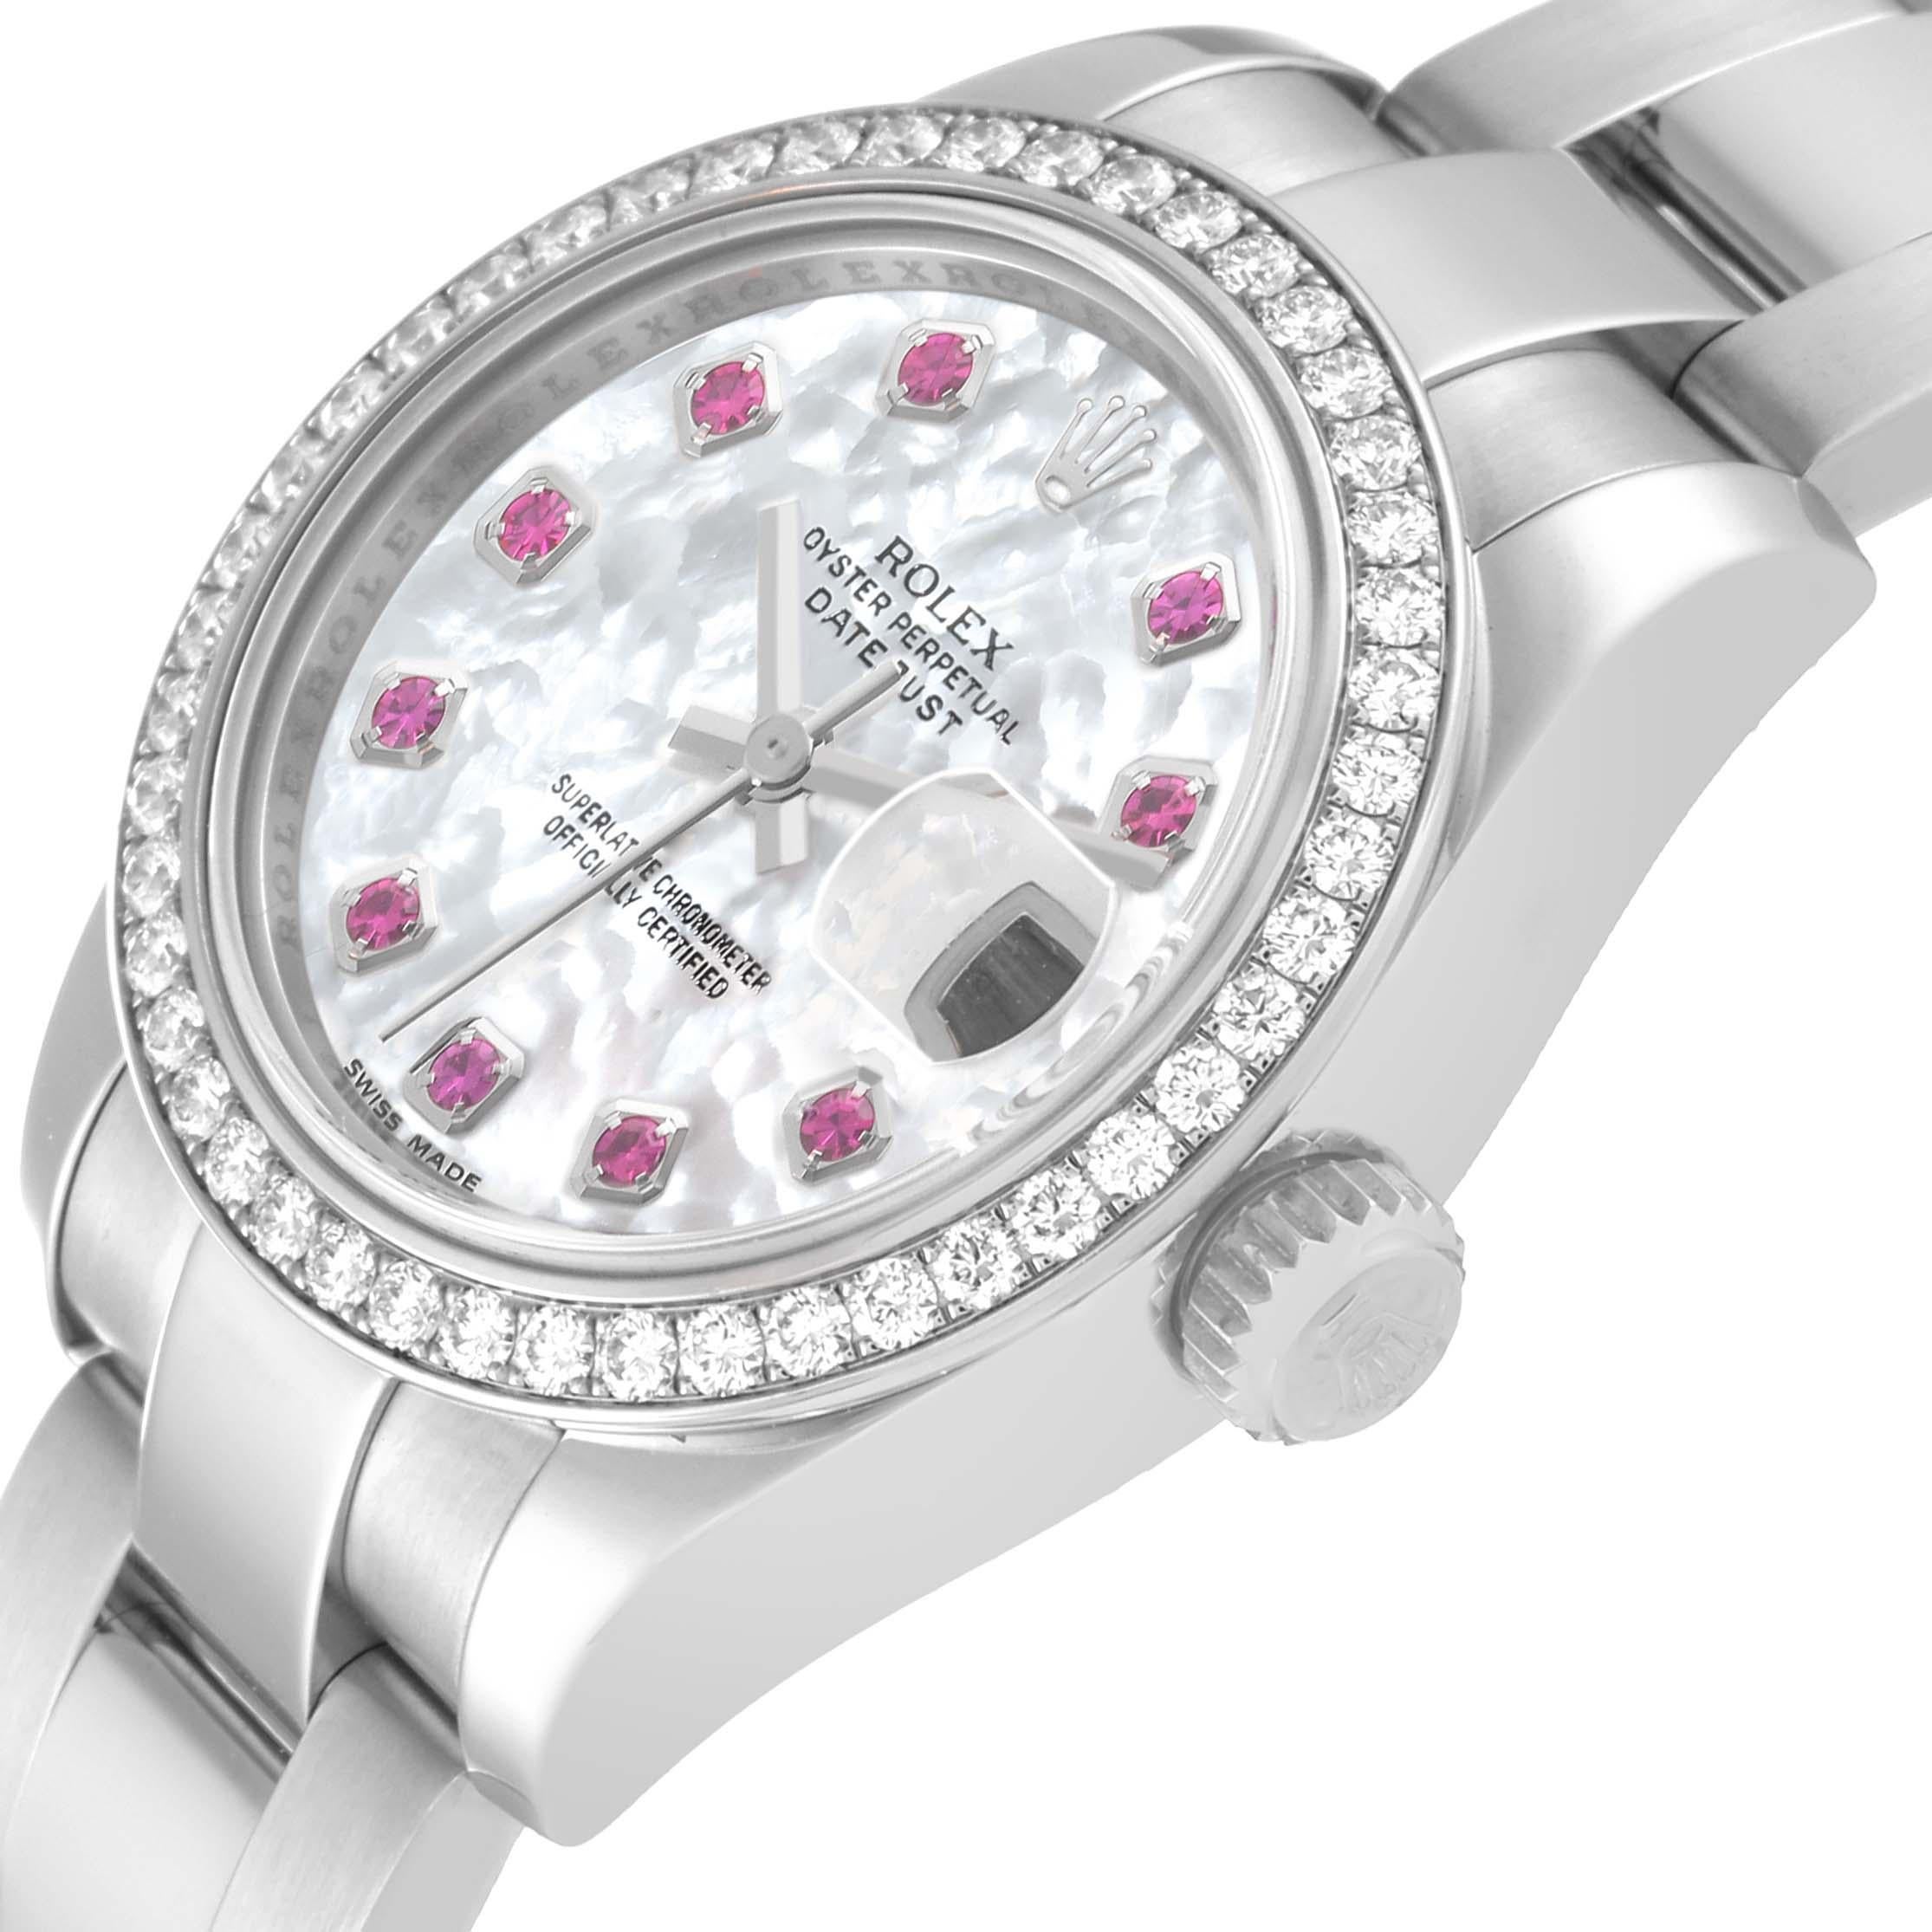 Rolex Datejust Steel White Gold Mother Of Pearl Ruby Diamond Ladies Watch 179384 For Sale 1